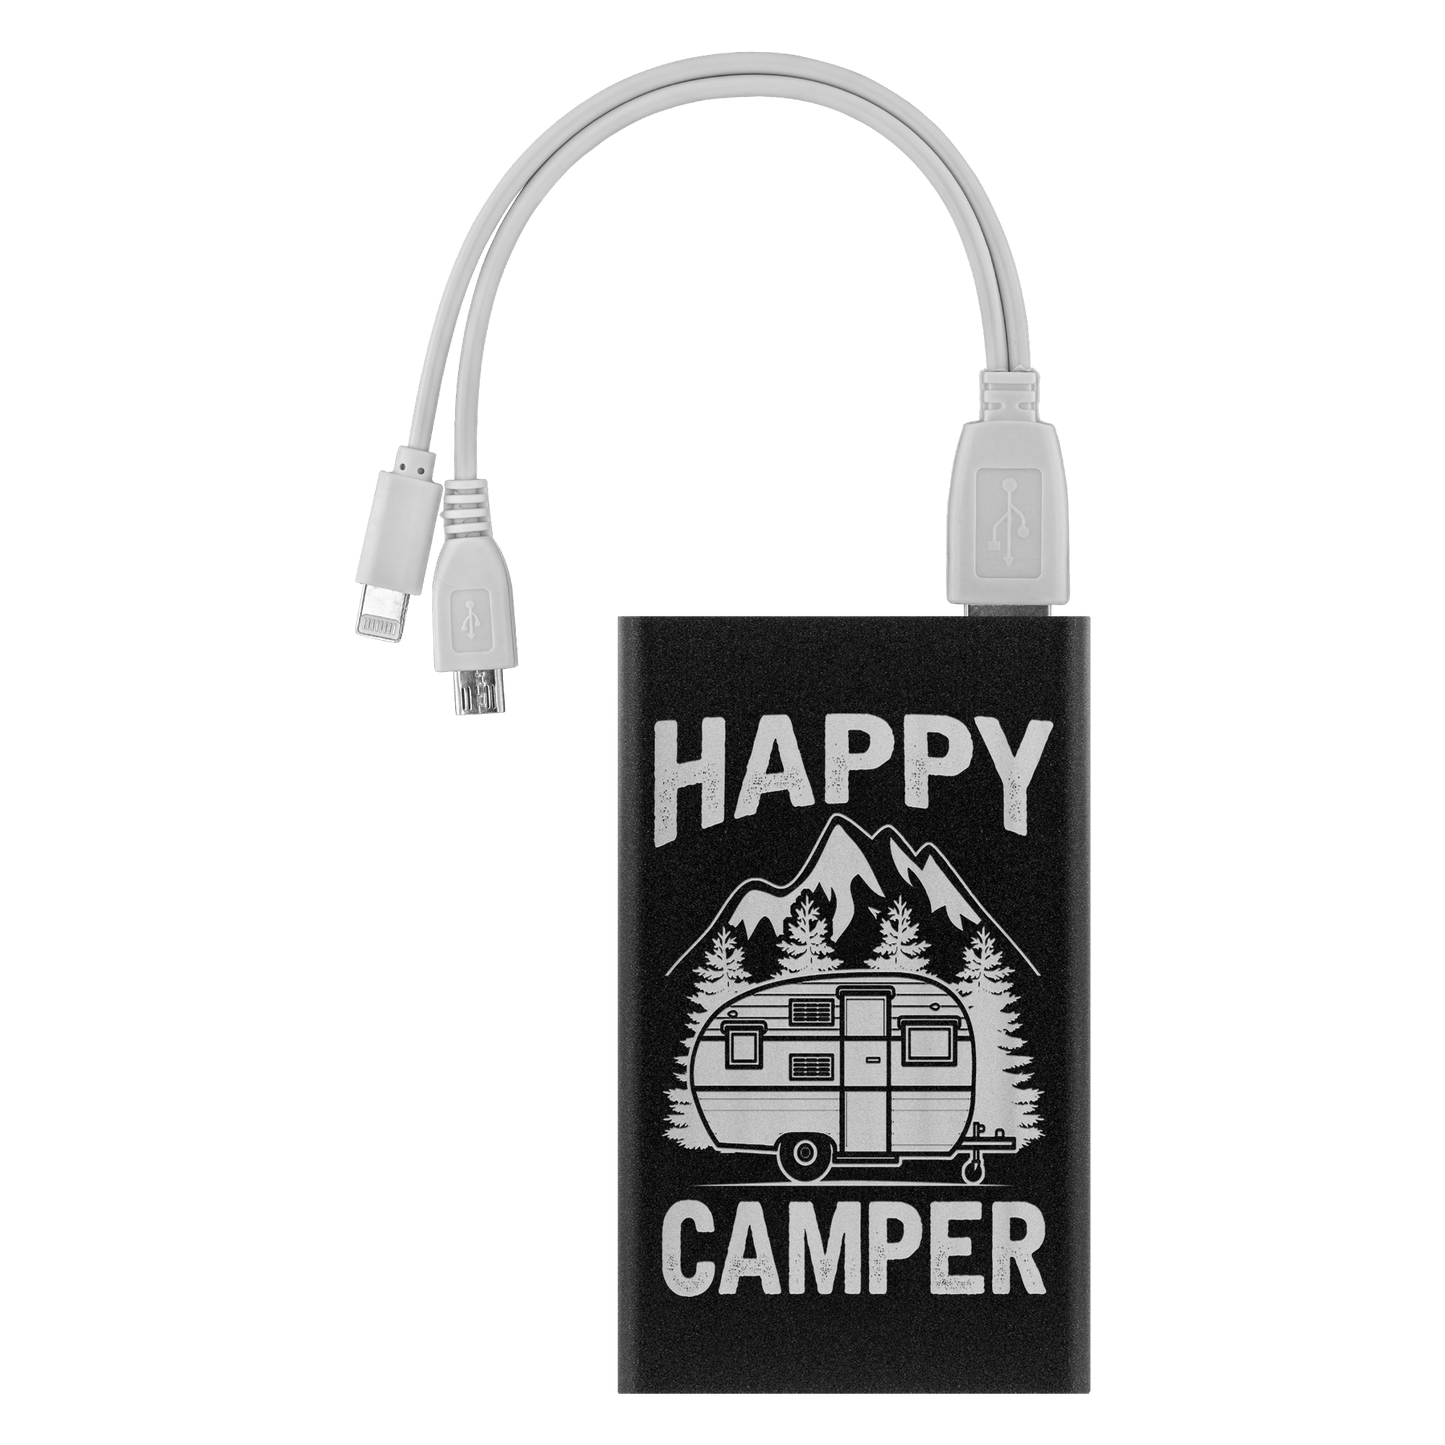 Official "Happy Camper" USB Power Bank Charger